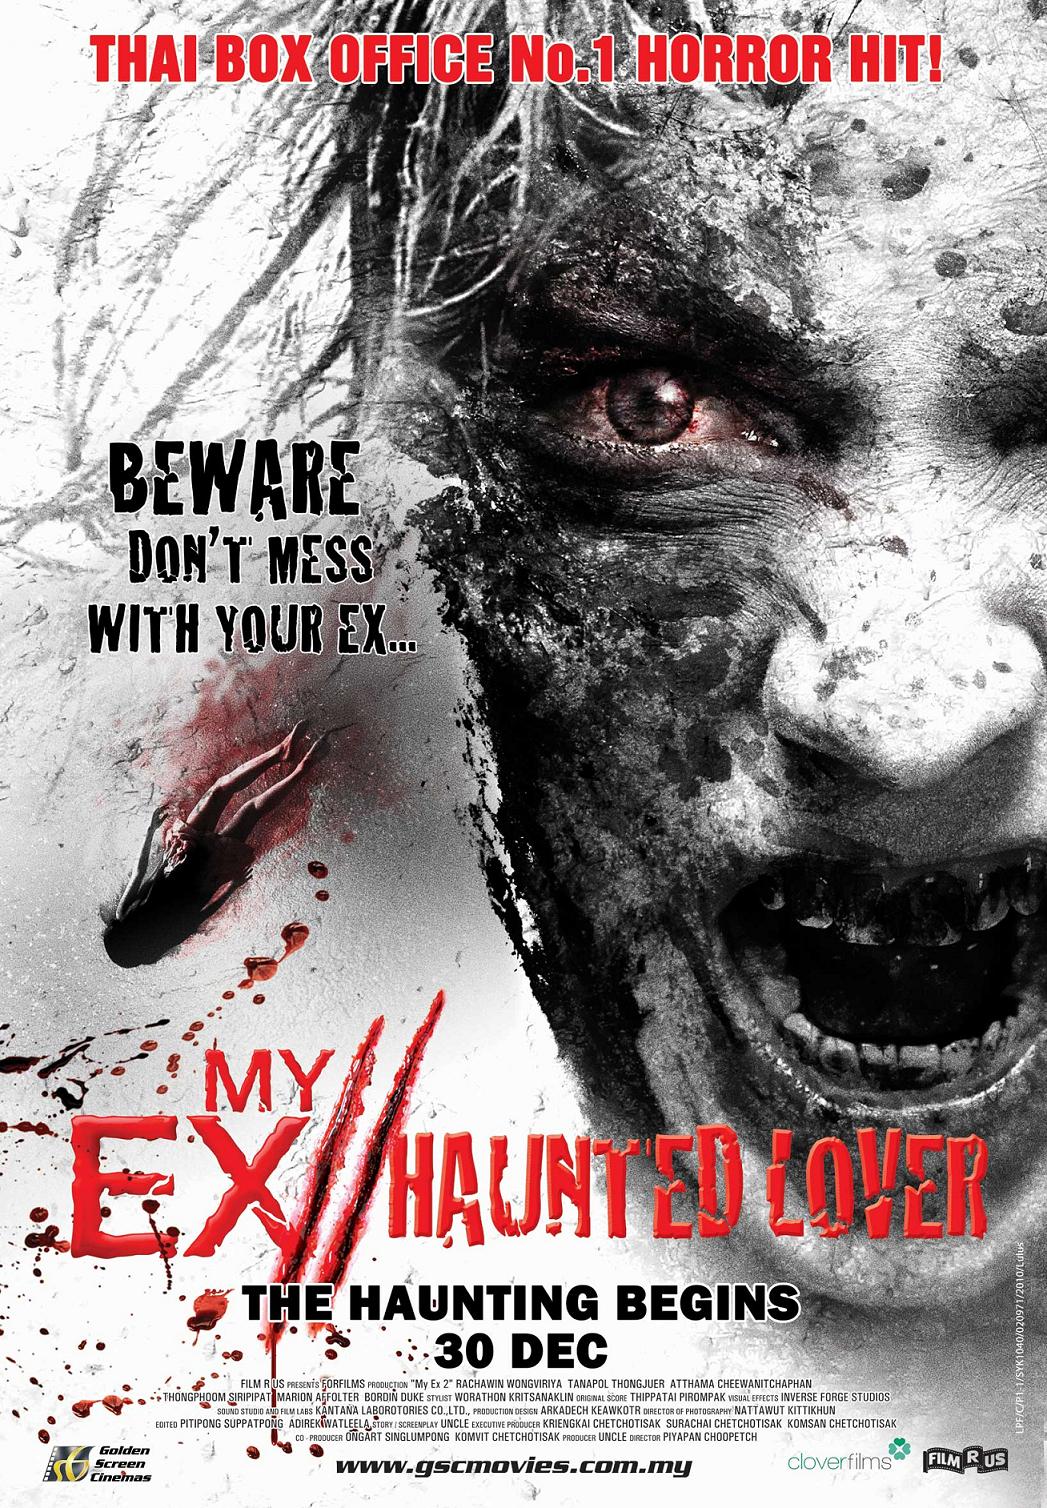 review horror movie my ex haunted lover from thailand by badin duke marion affolter and pete thong-jeur